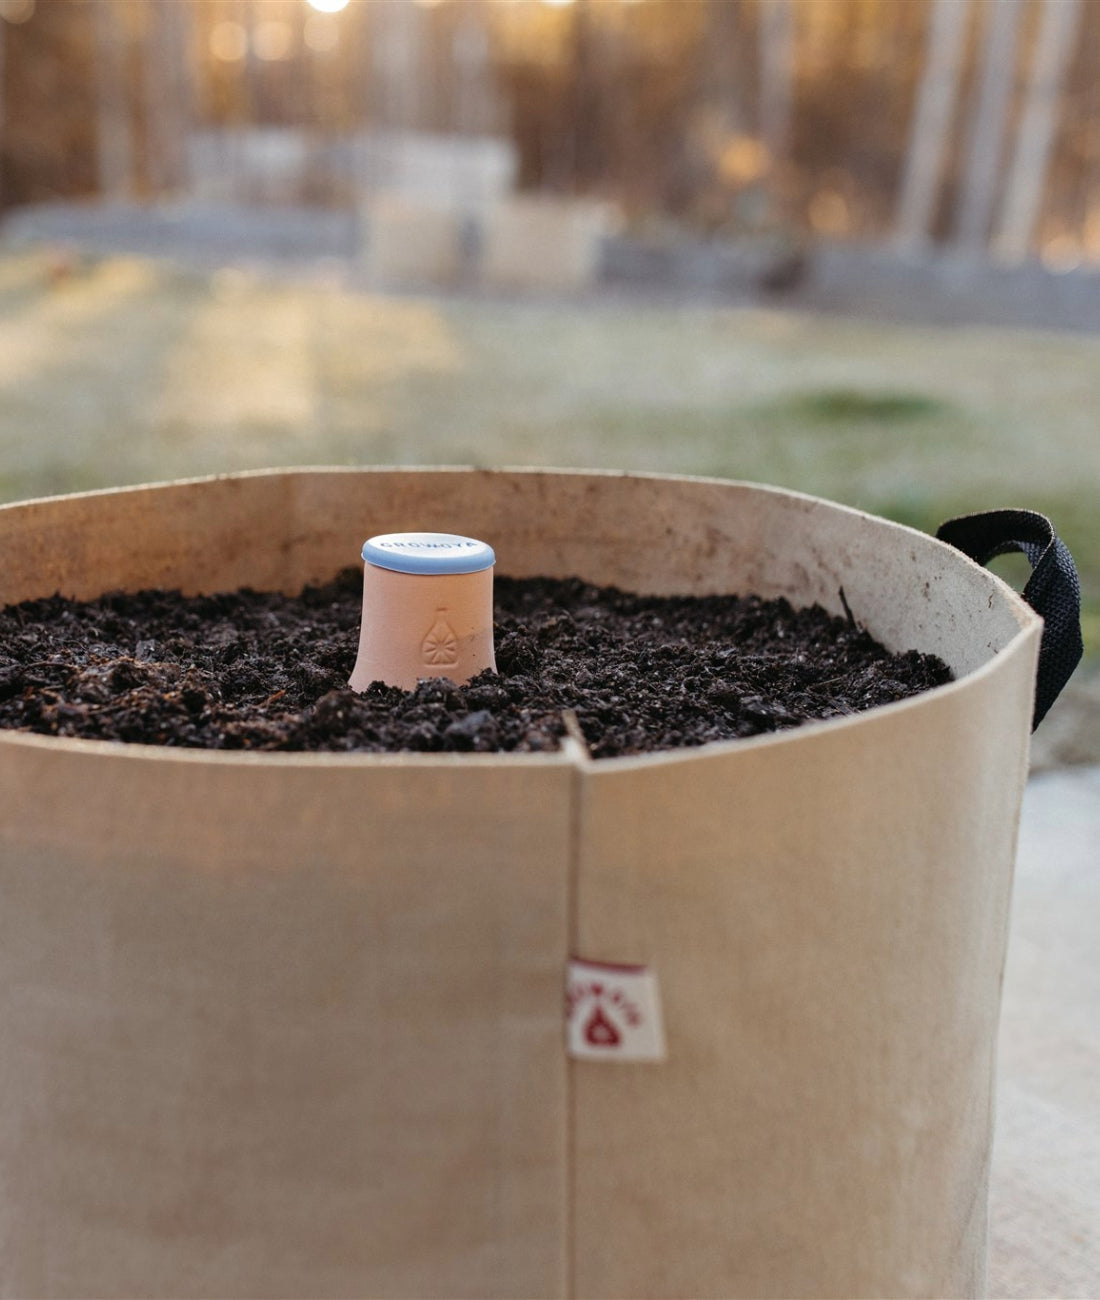 Oya™ Grow Bag filled with soil and an Oya™ Watering Pot